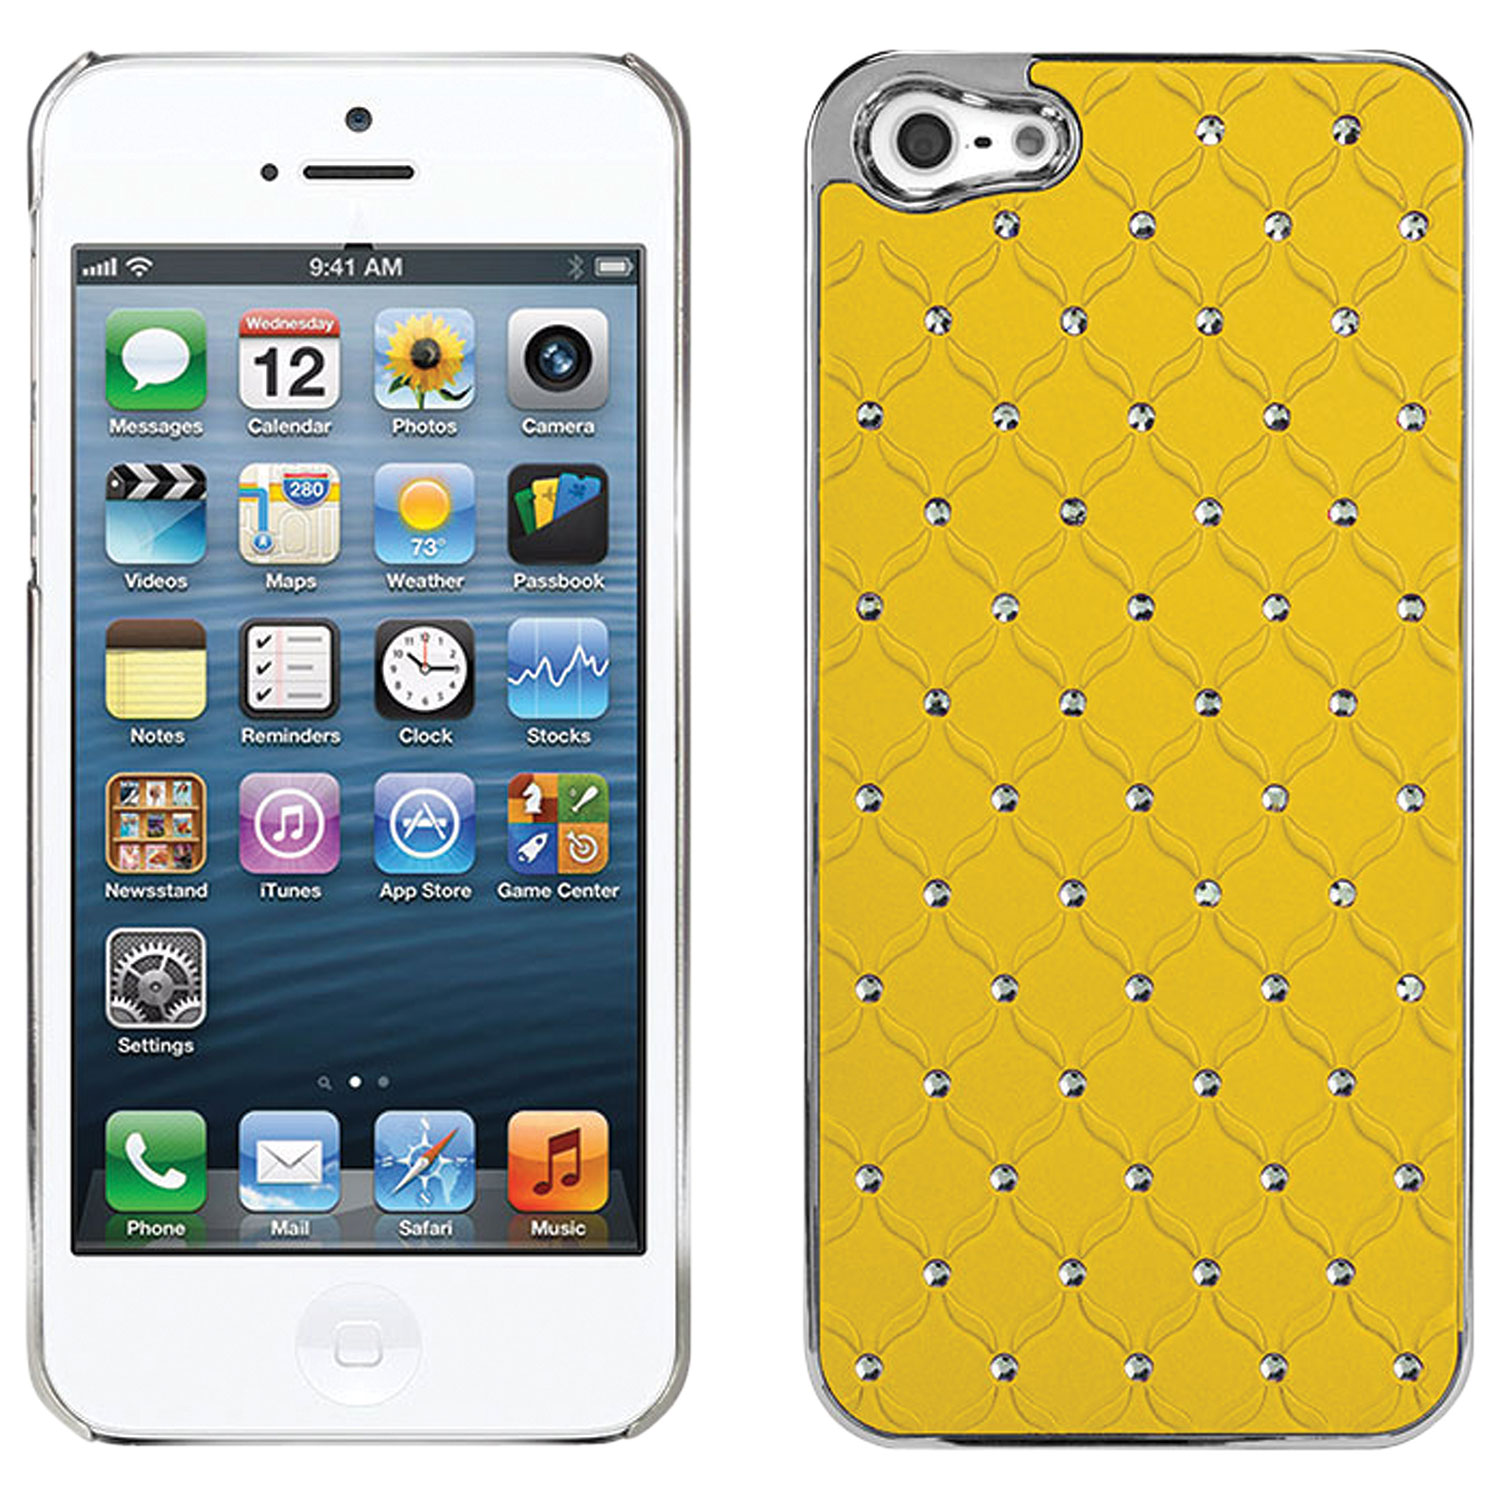 Cellet Lux Diamond Proguard iPhone 5/5s Hard Shell Case - Yellow